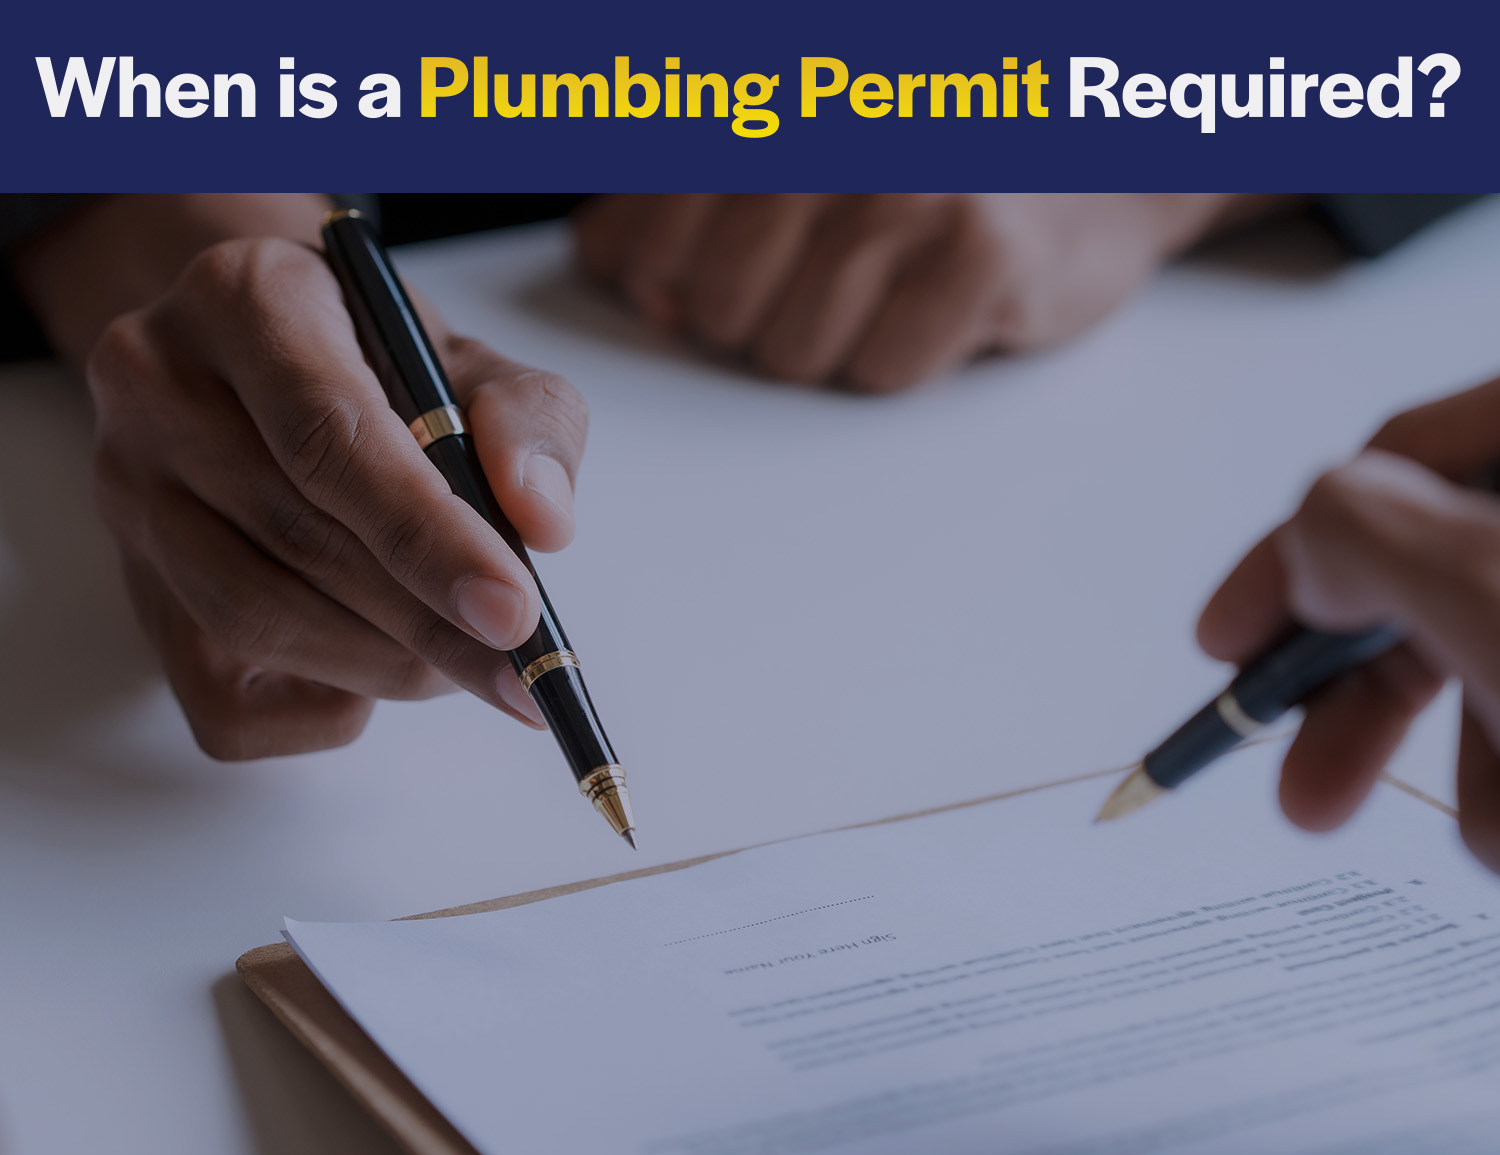 When is a plumbing permit required?